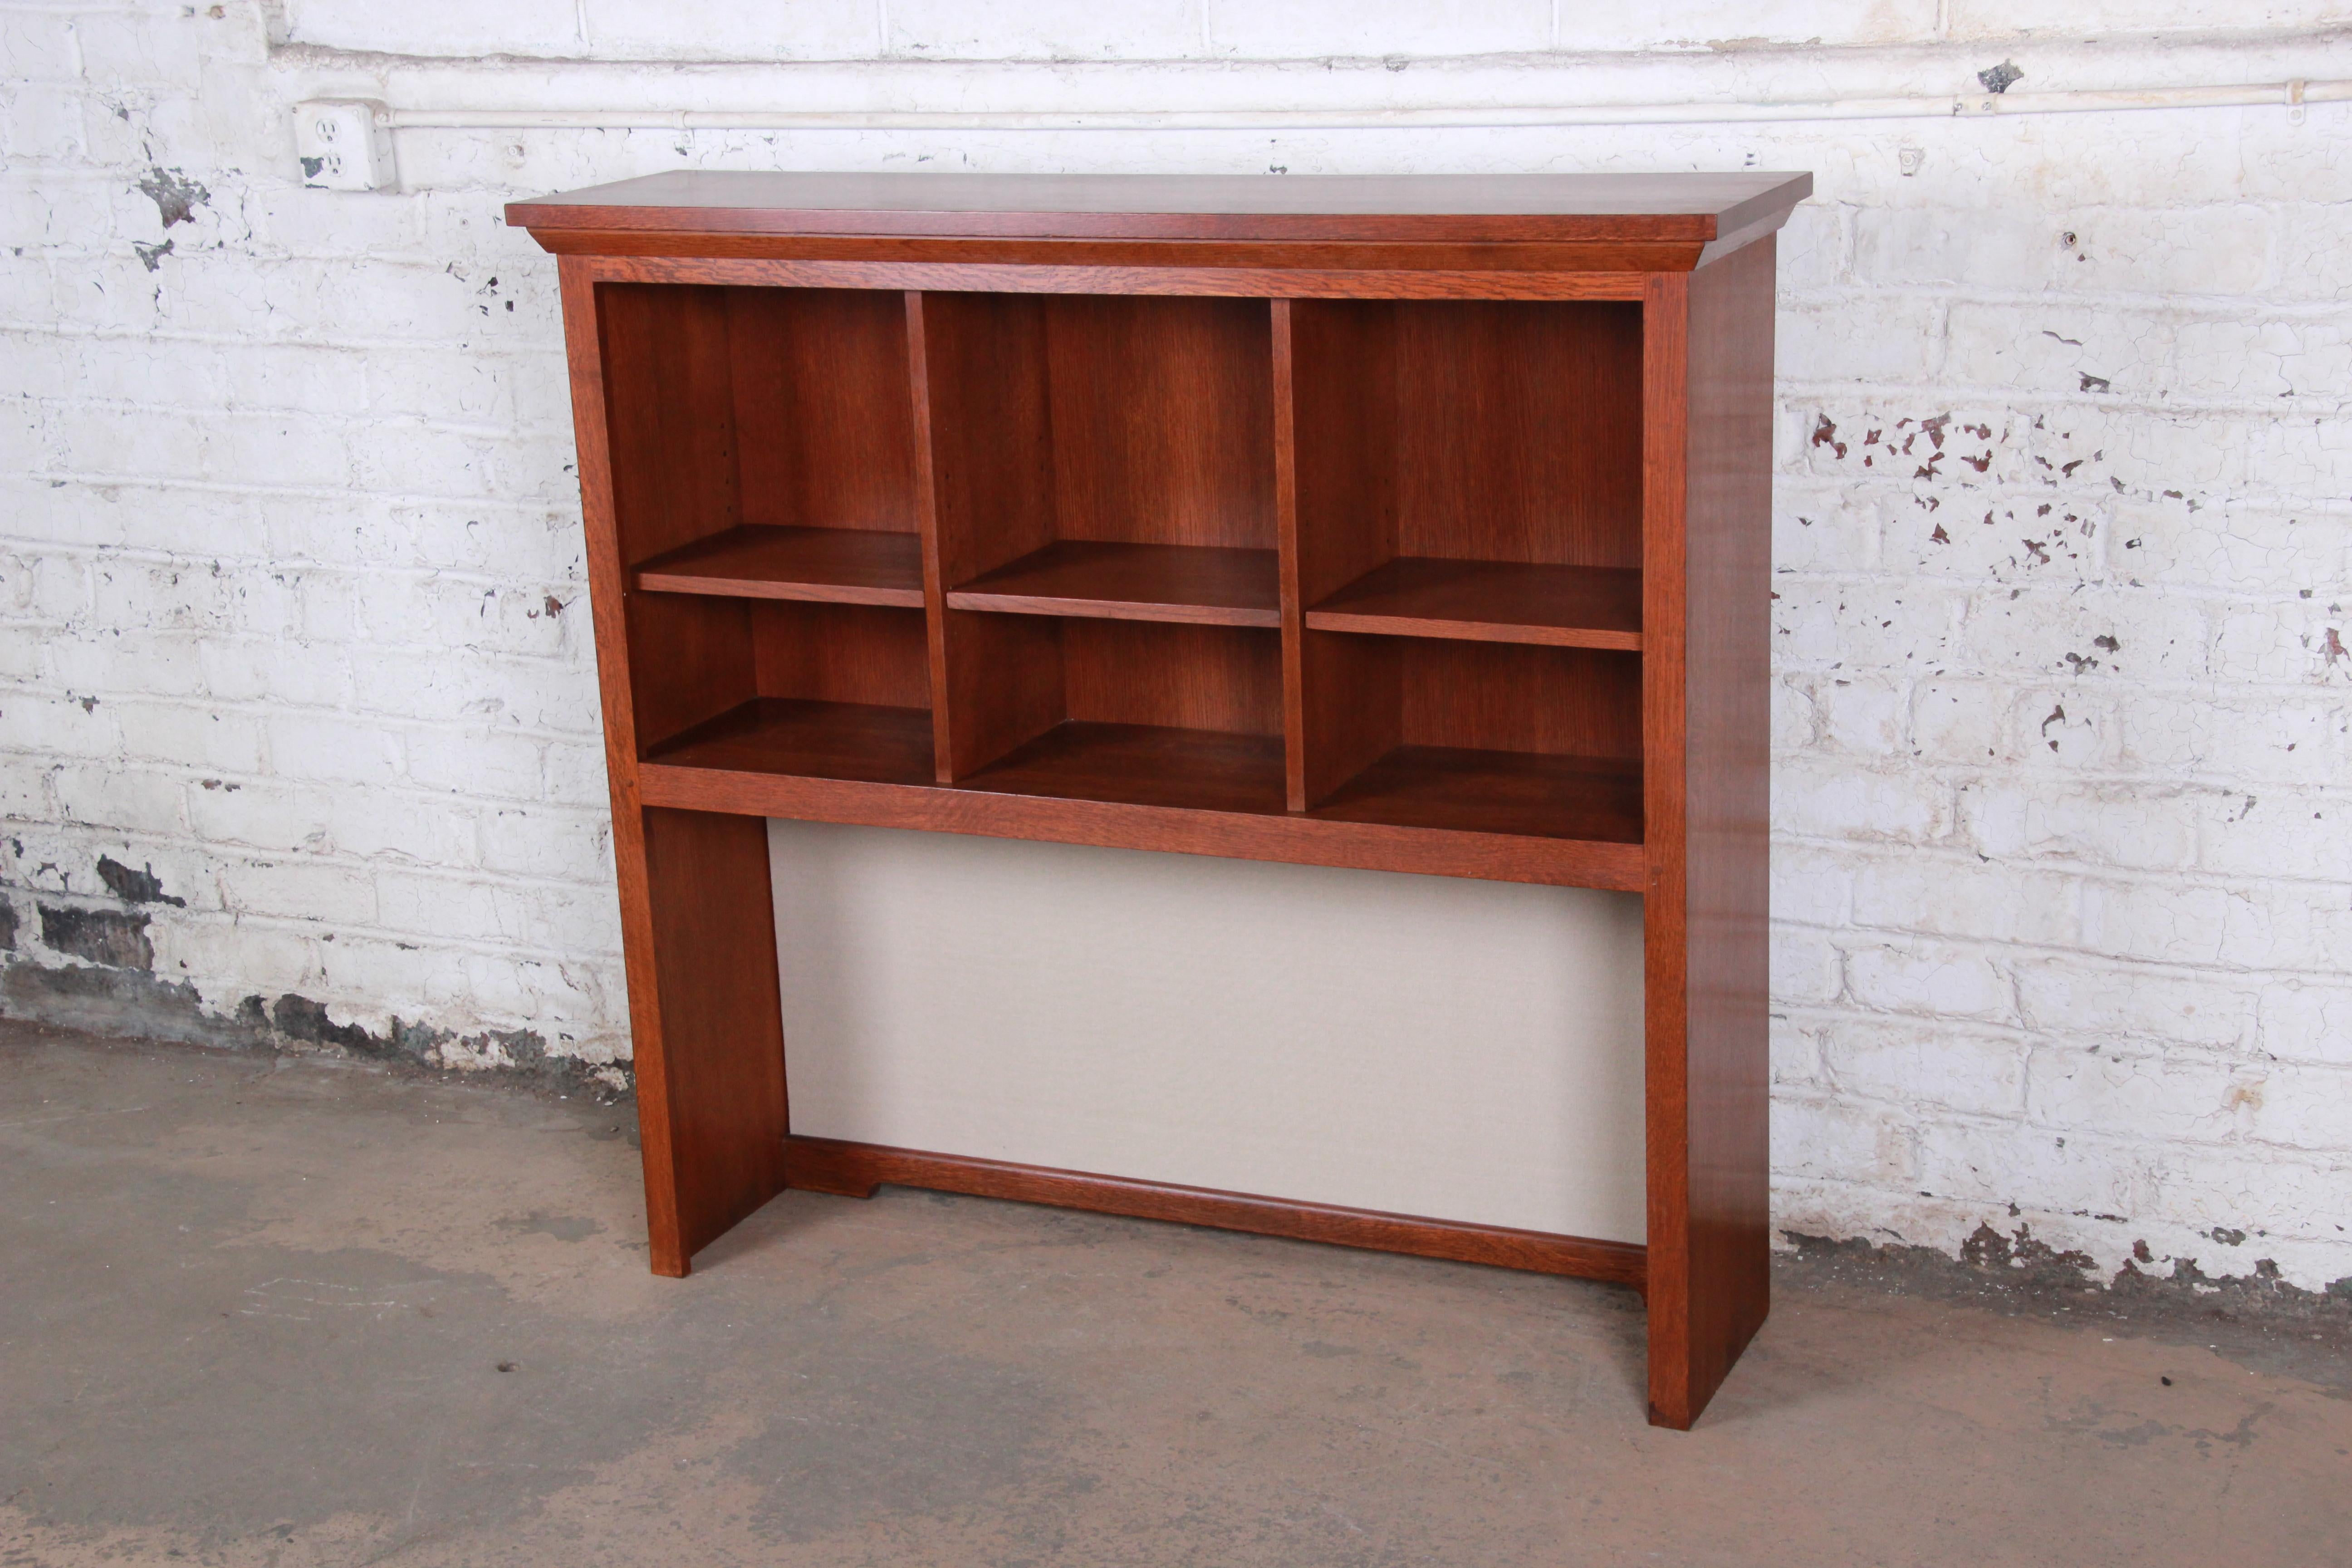 A beautiful solid oak Mission Arts & Crafts bookcase or hutch. It features three cubbies with an adjustable shelf in each and open storage below.

By Stickley,

circa 1990s

Measures: 51.25